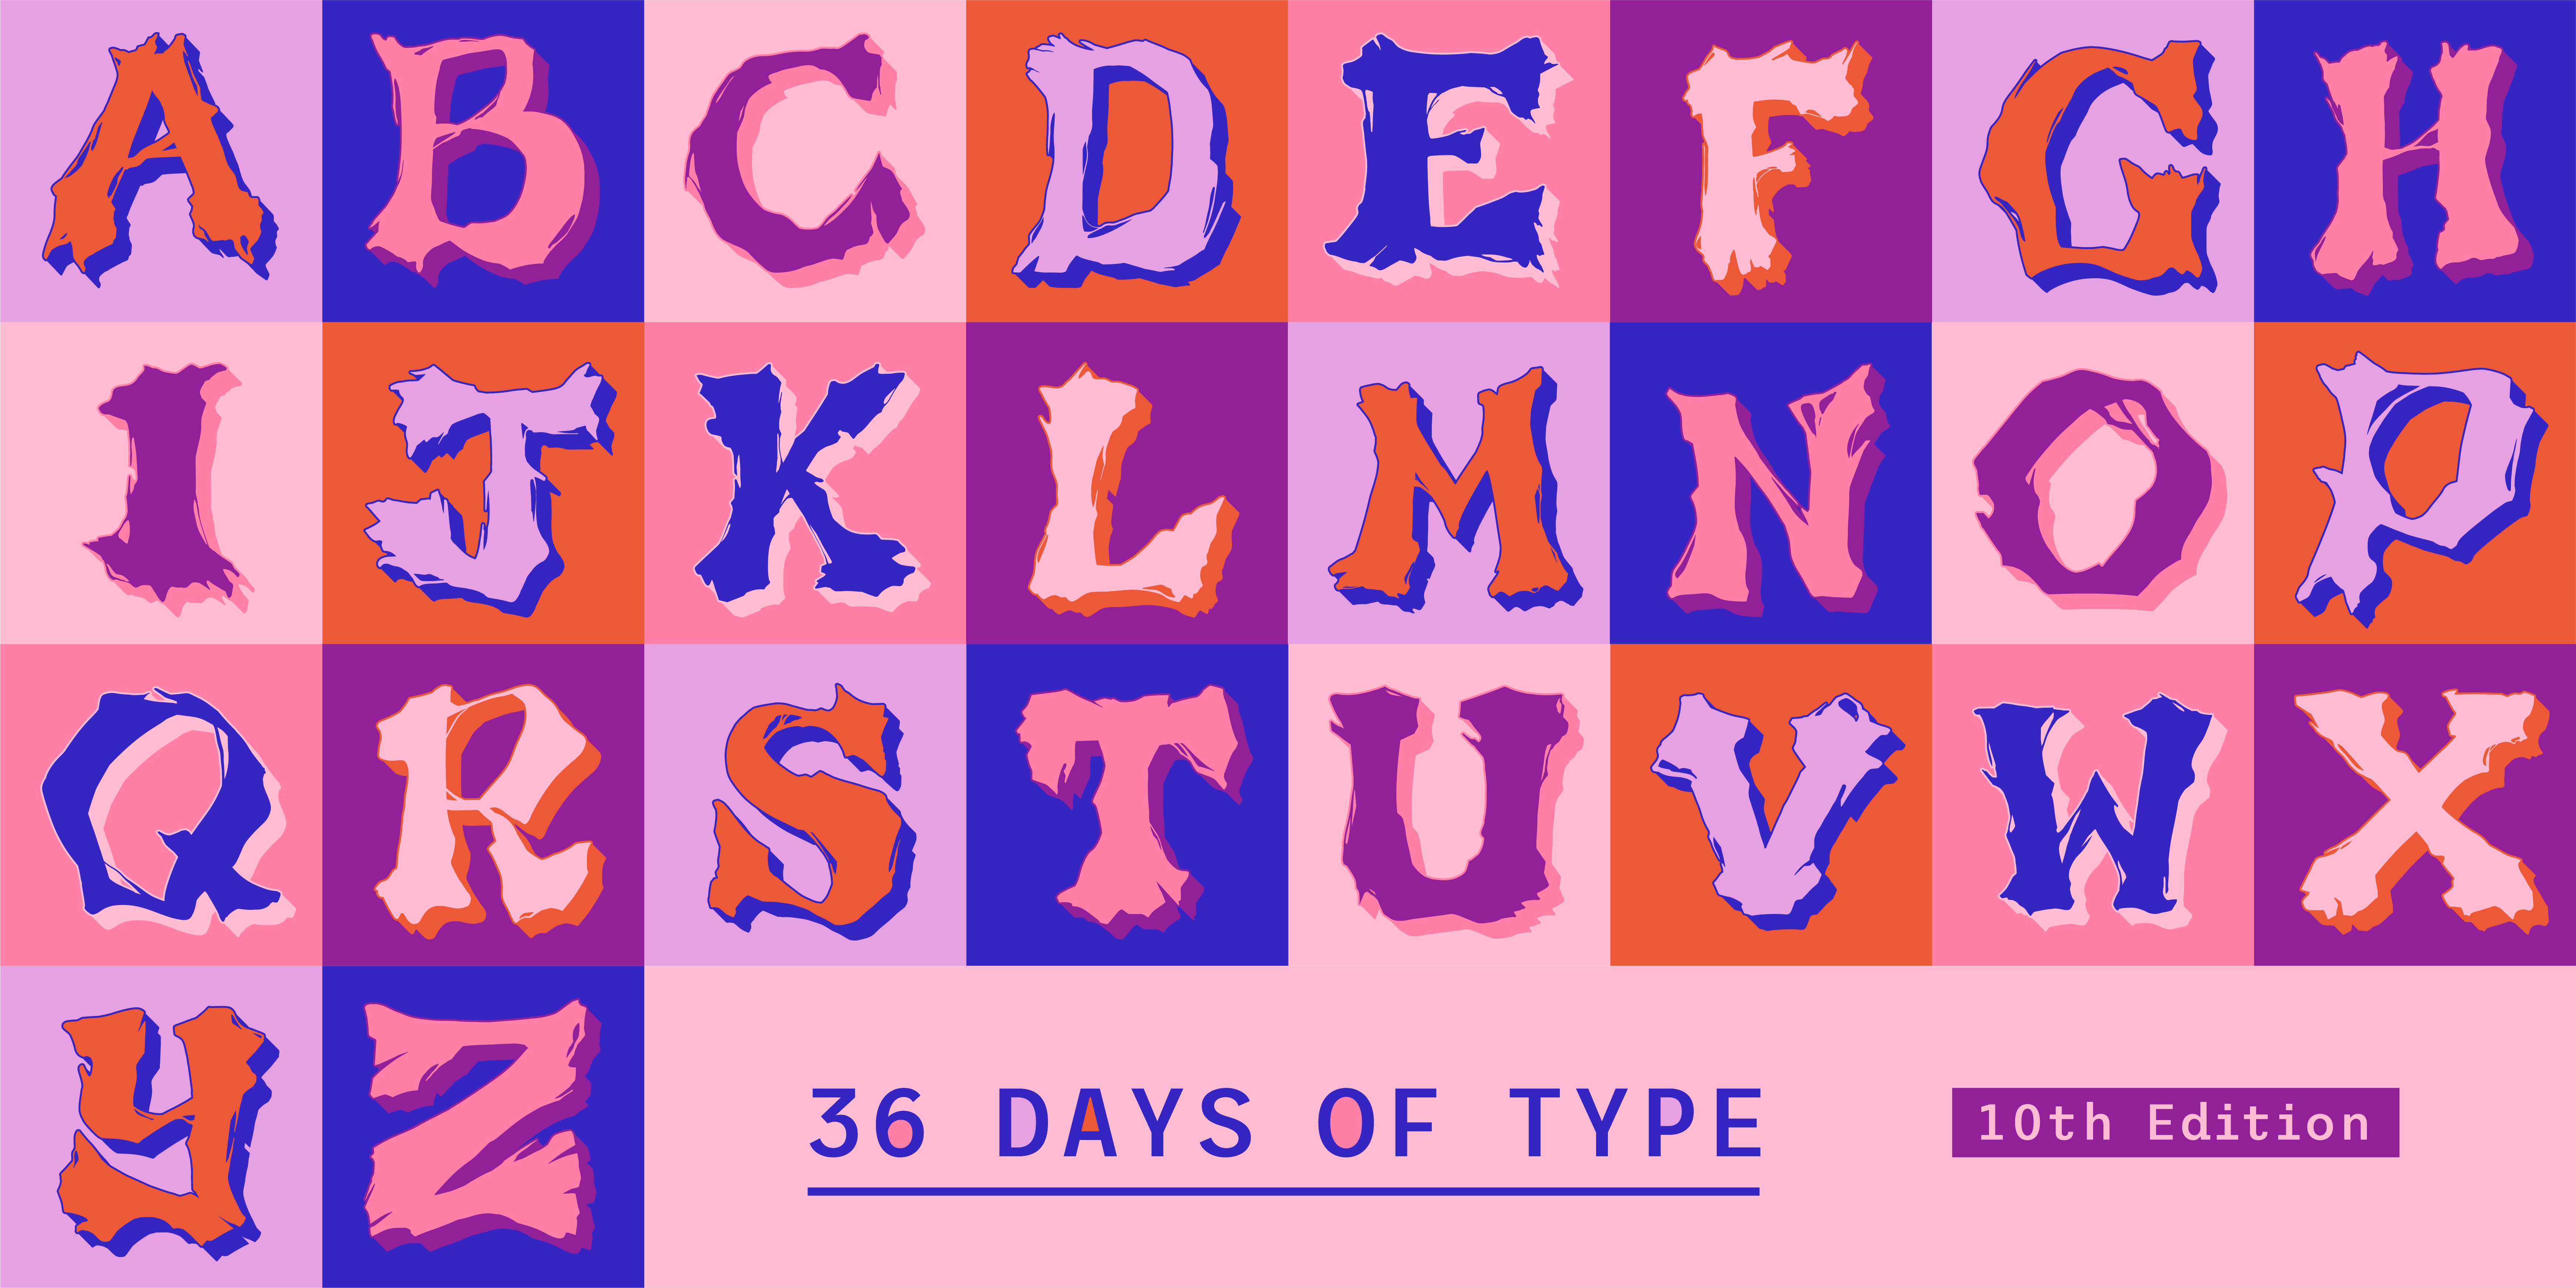 The Project — 36 Days of Type